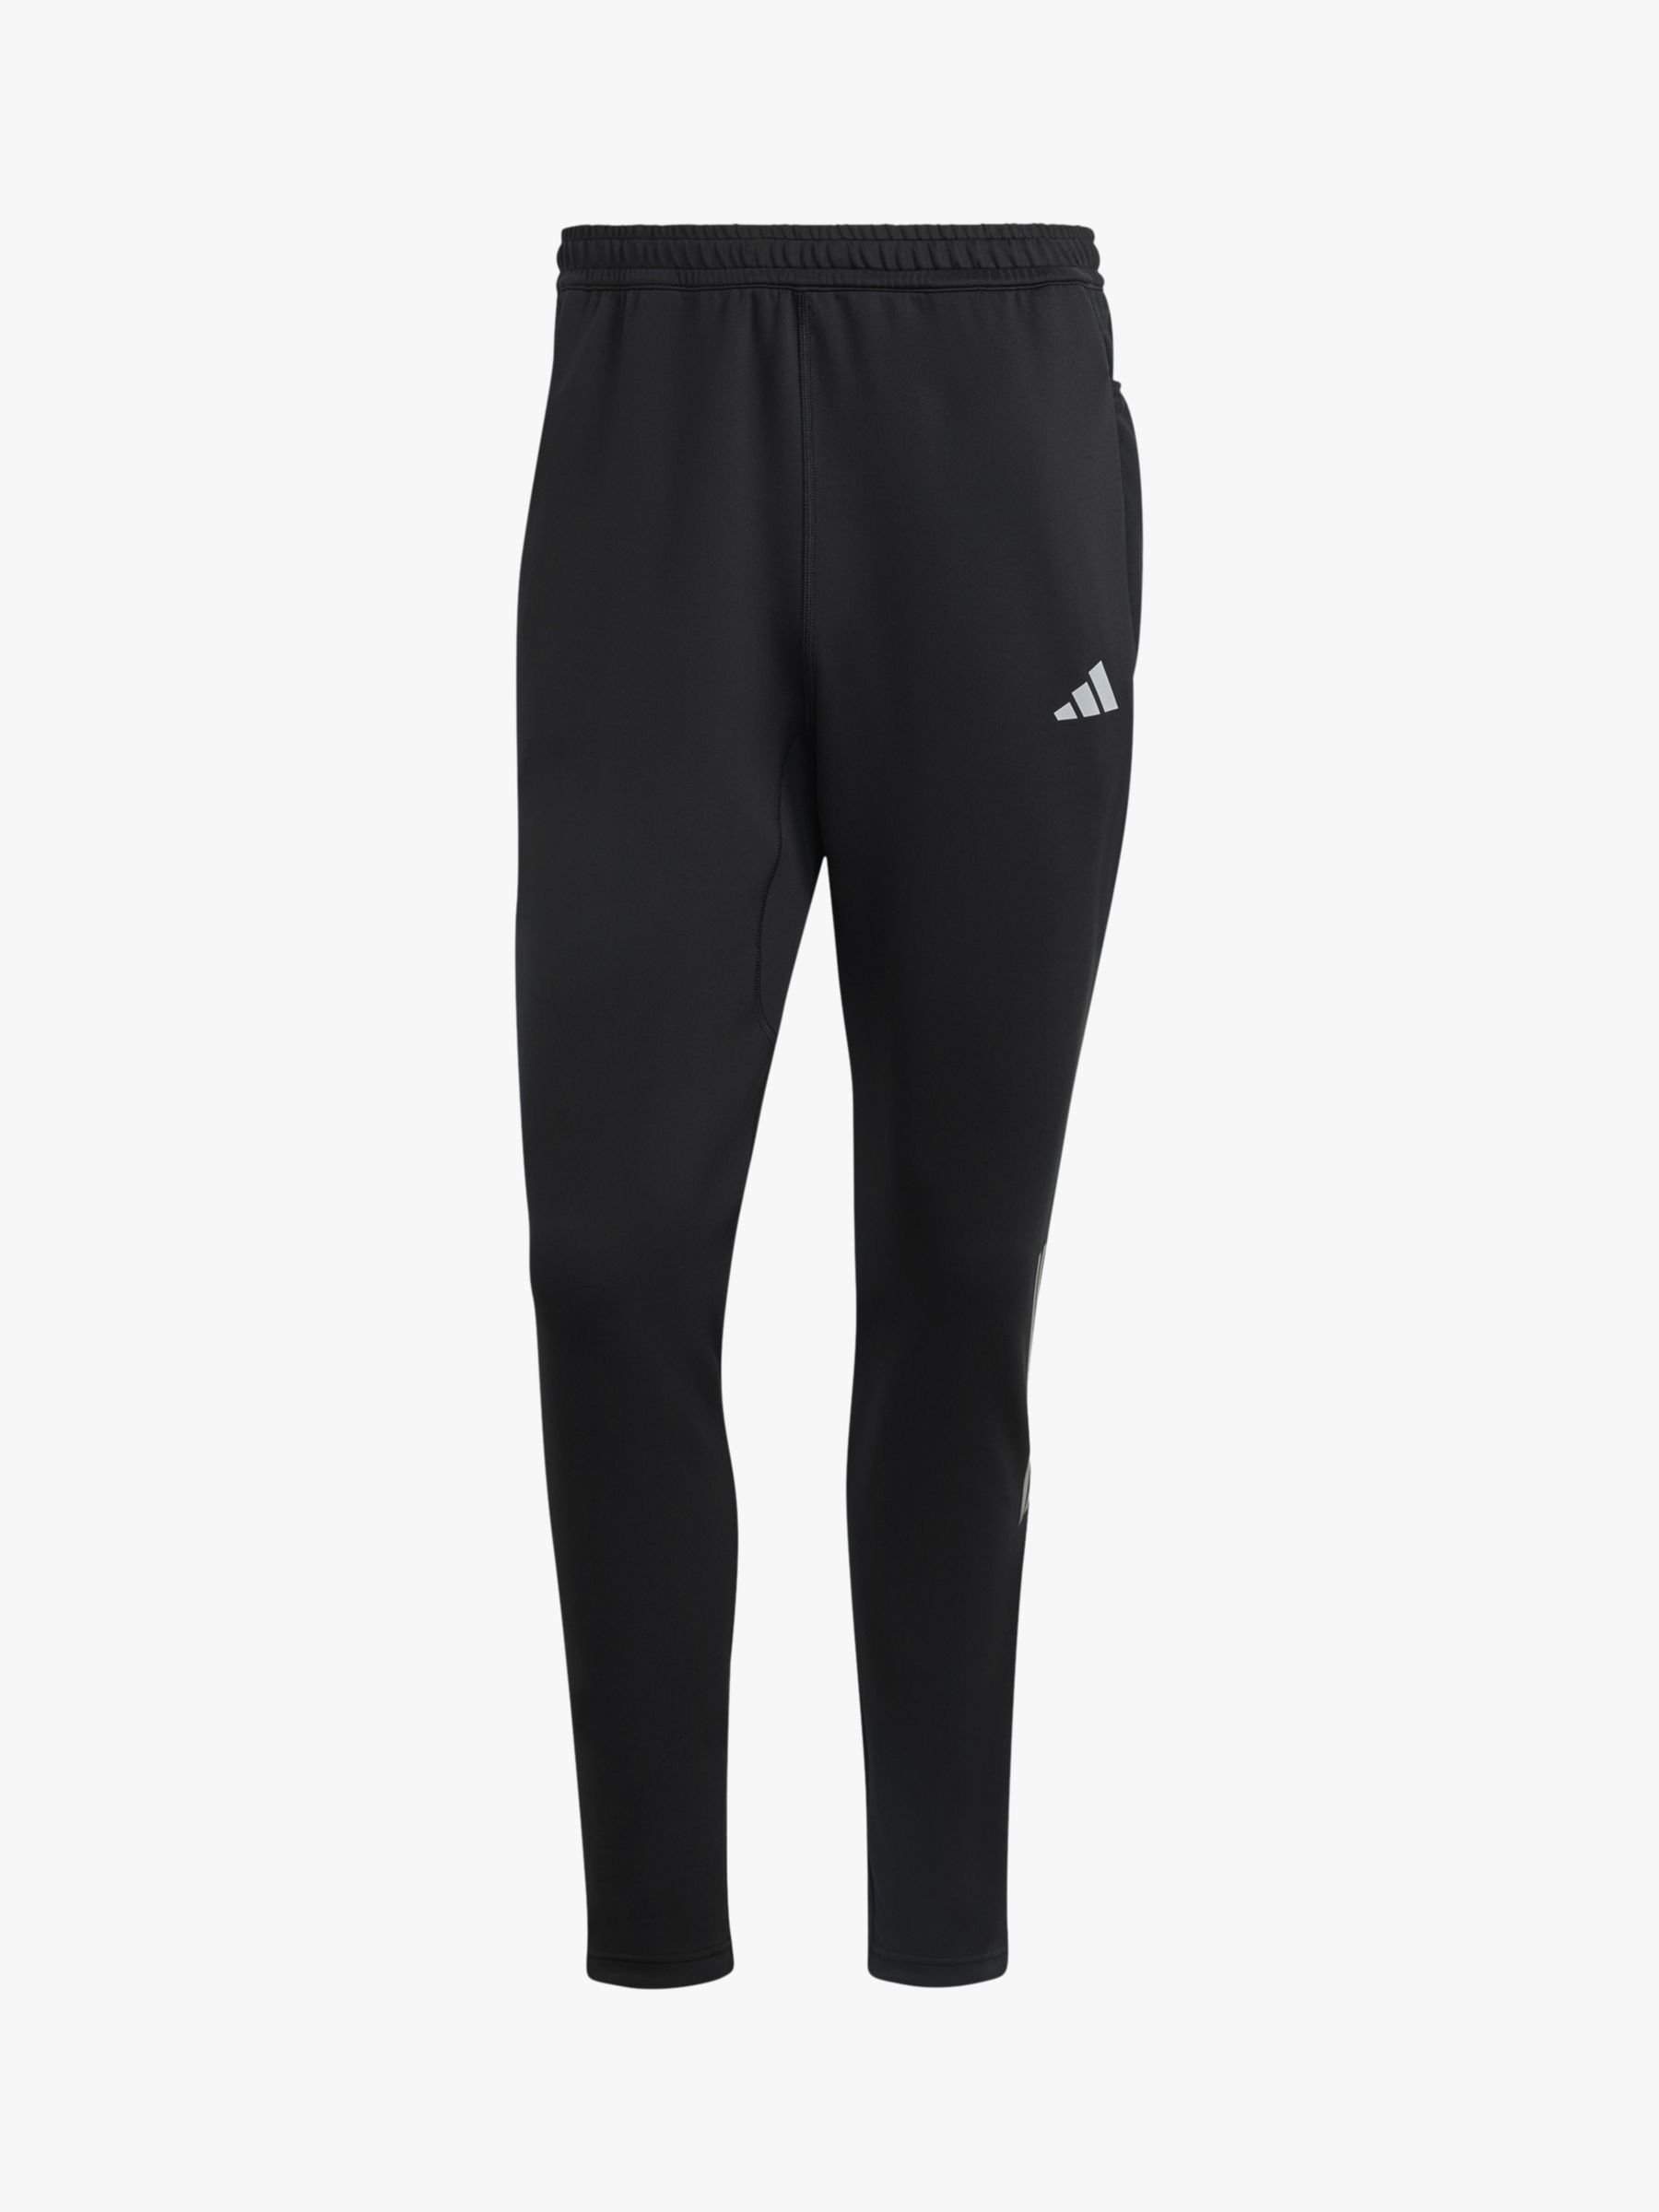 adidas Own The Run Astro Joggers at John Lewis & Partners